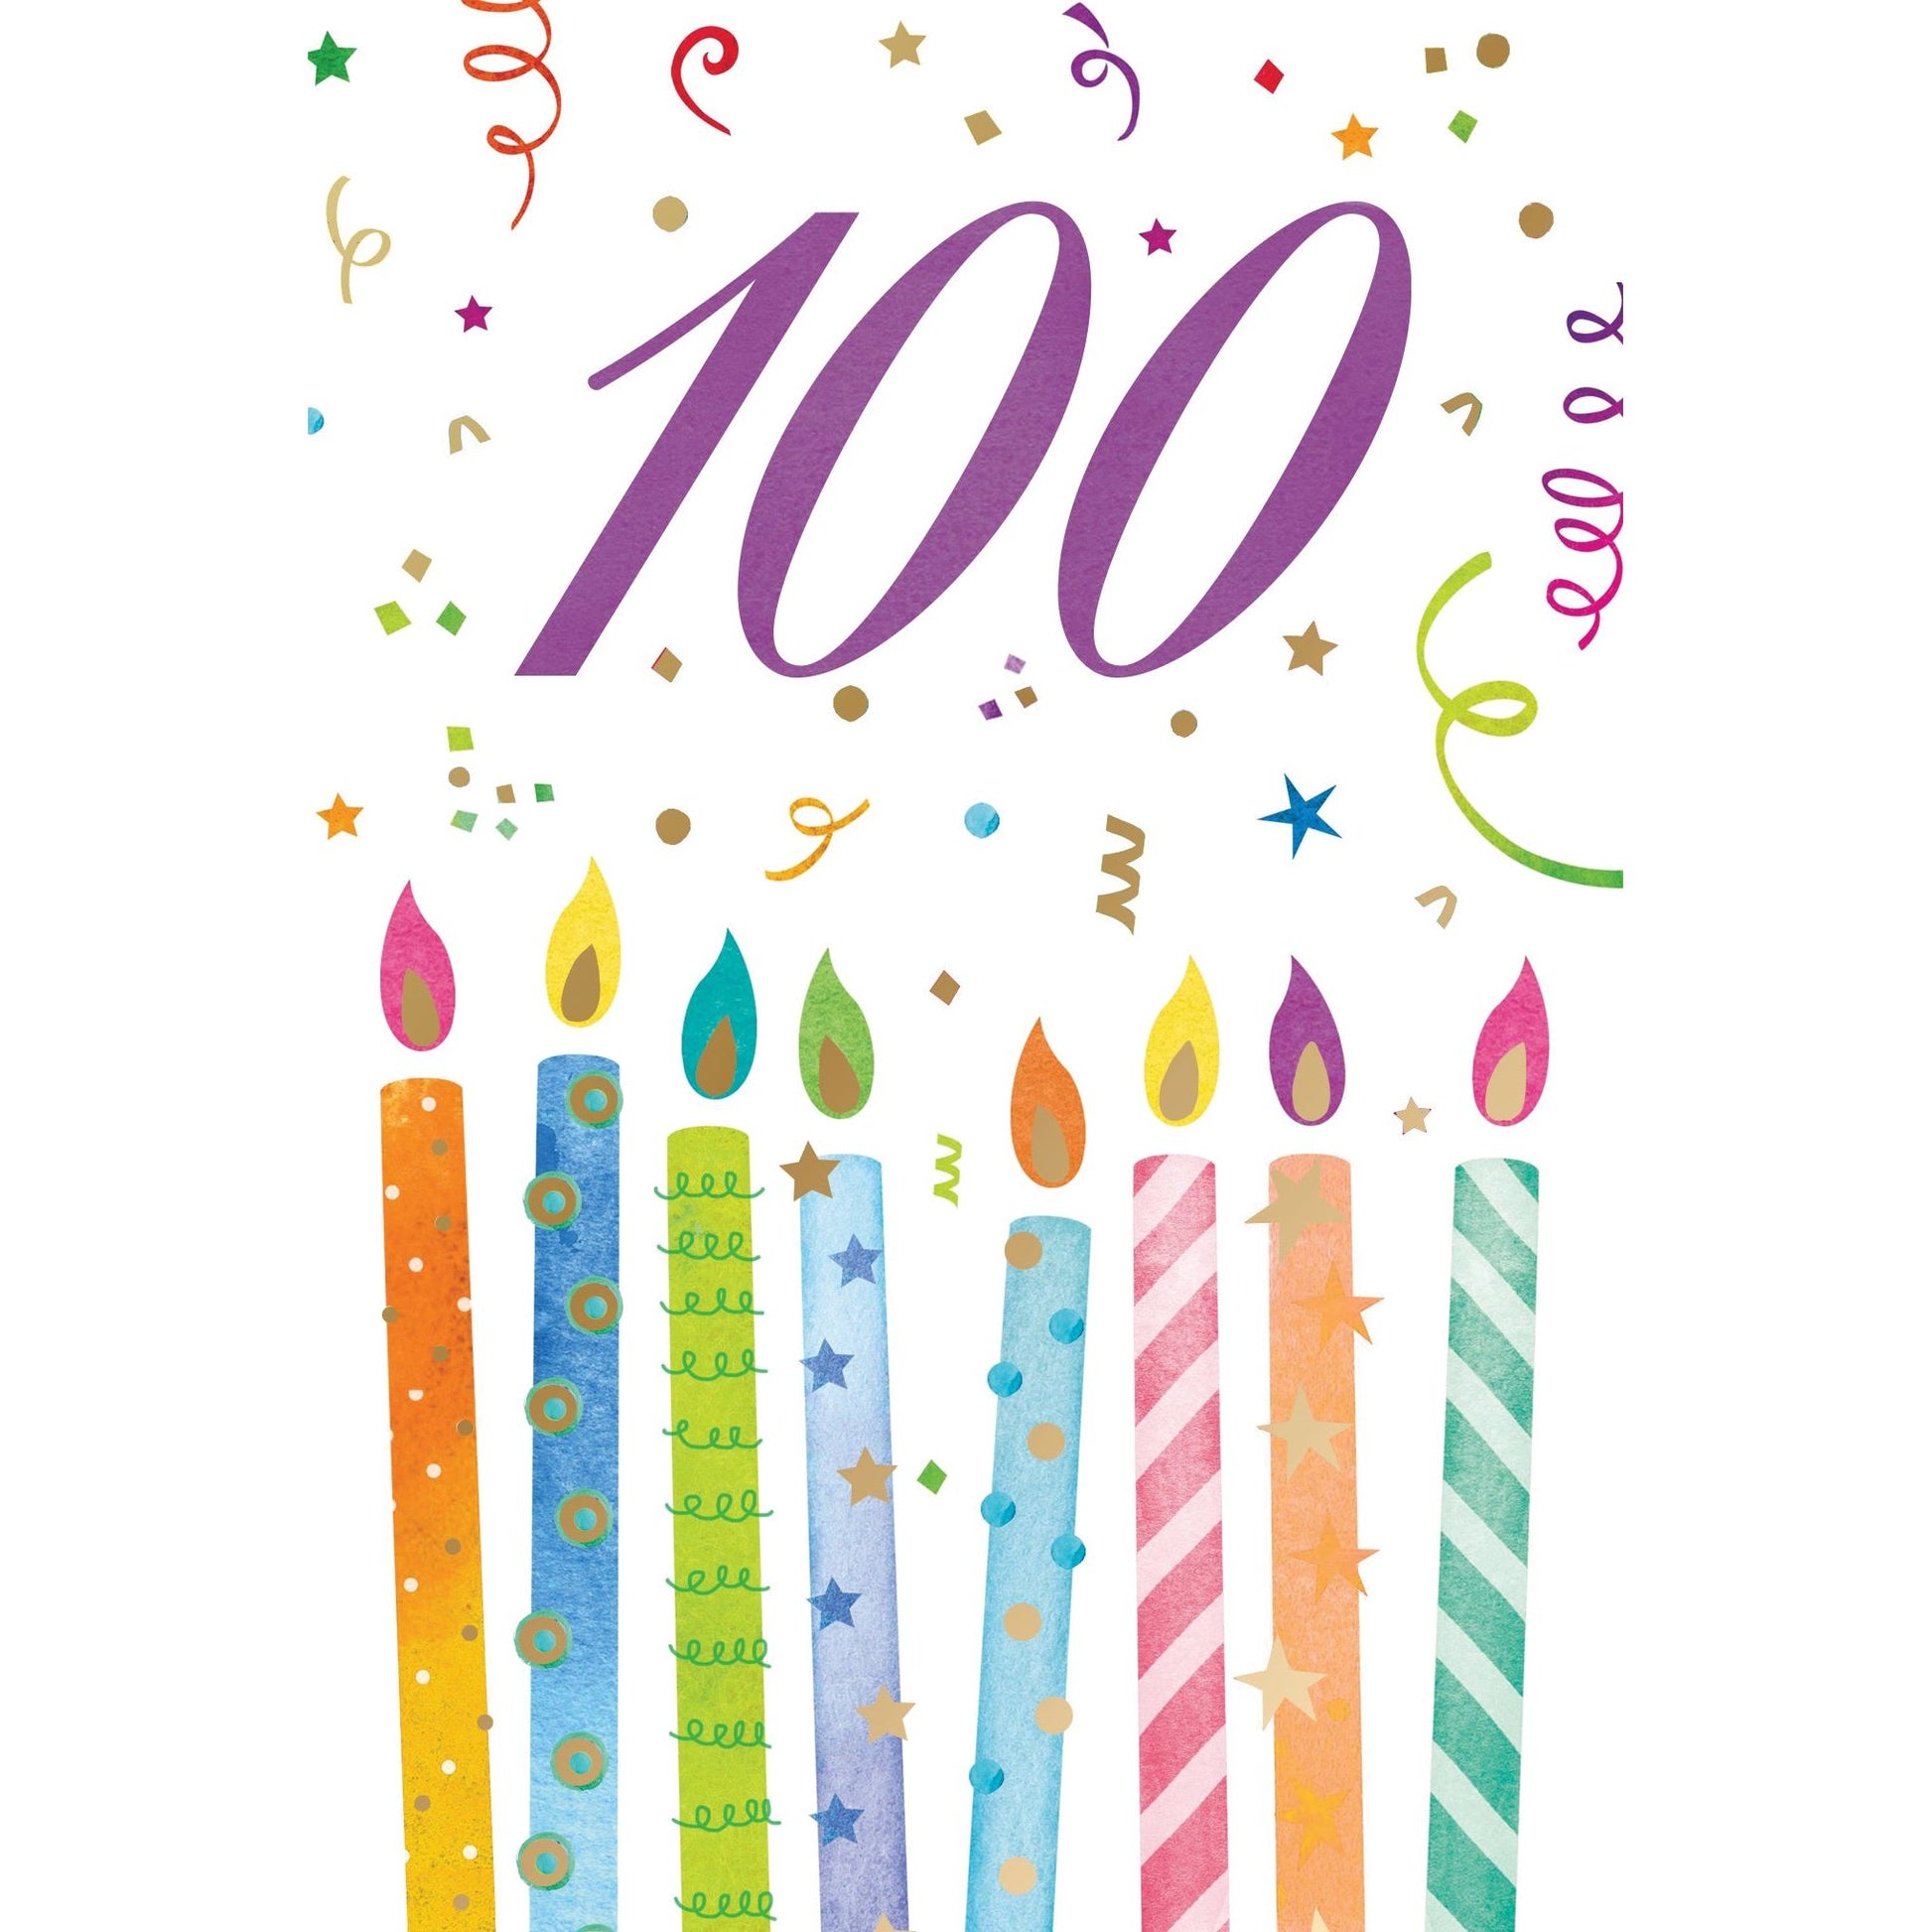 100 Birthday Card with colorful candles - Cardmore